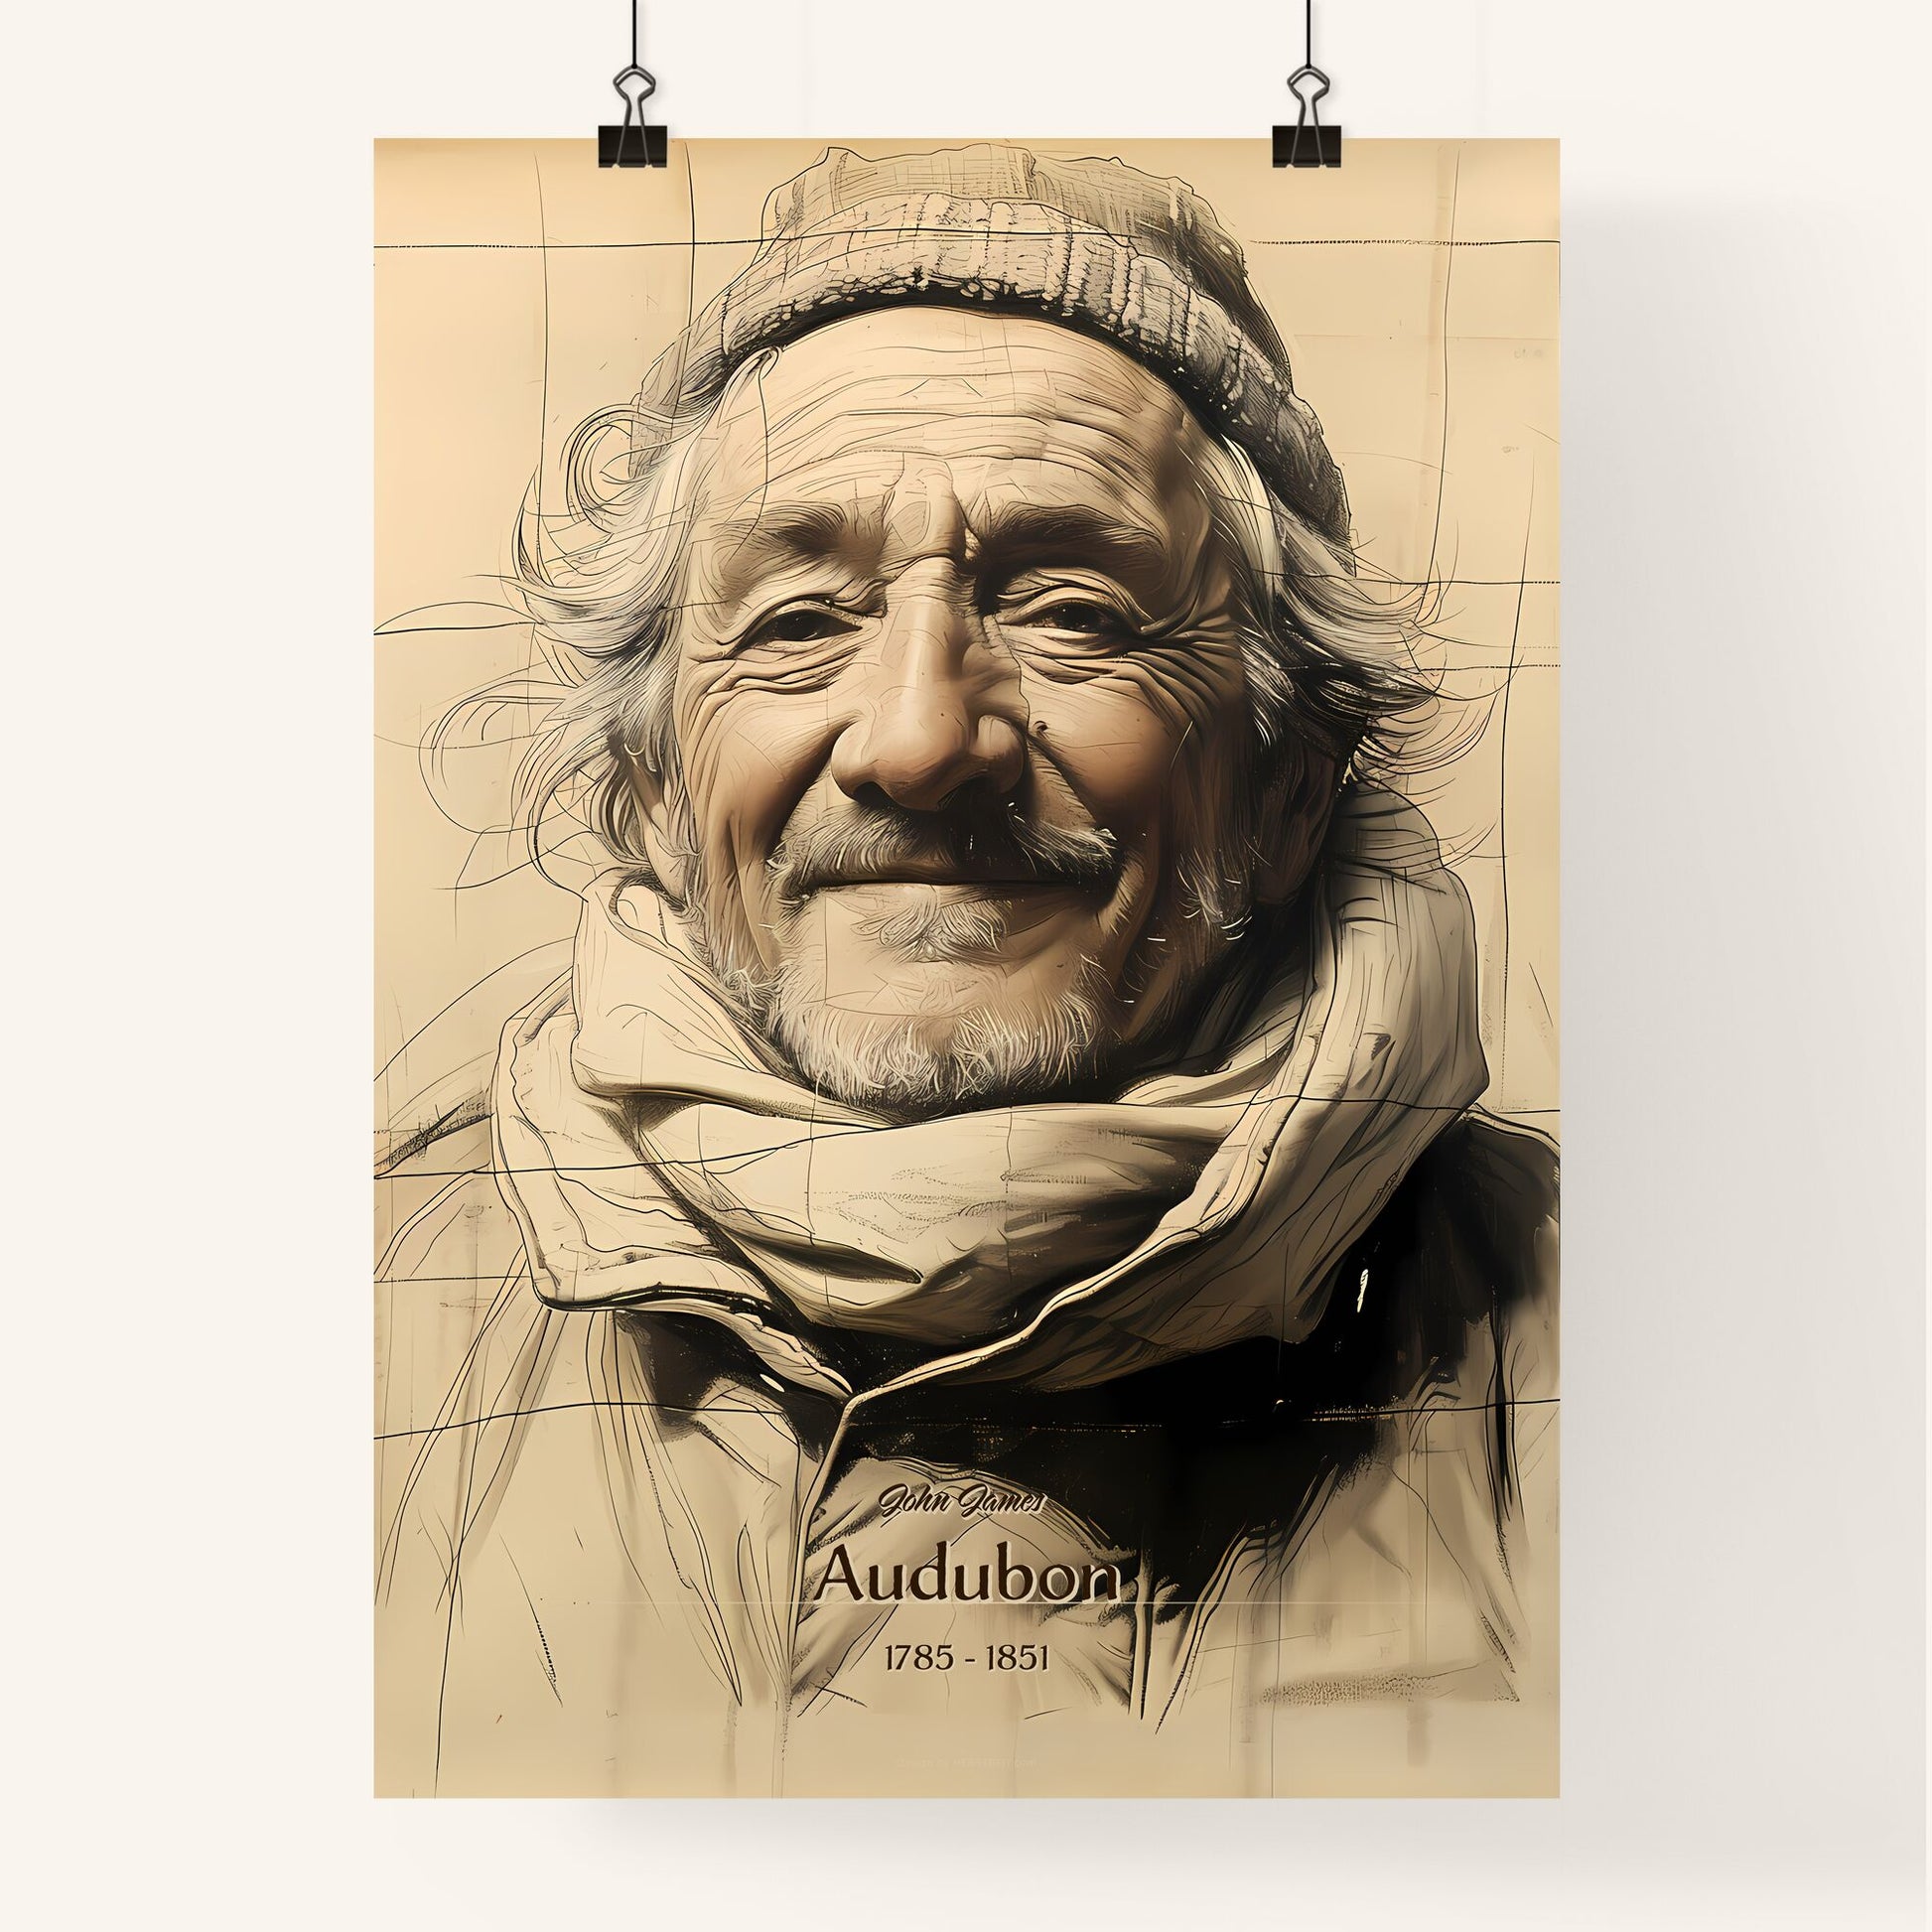 John James, Audubon, 1785 - 1851, A Poster of a man with a mustache and a scarf Default Title